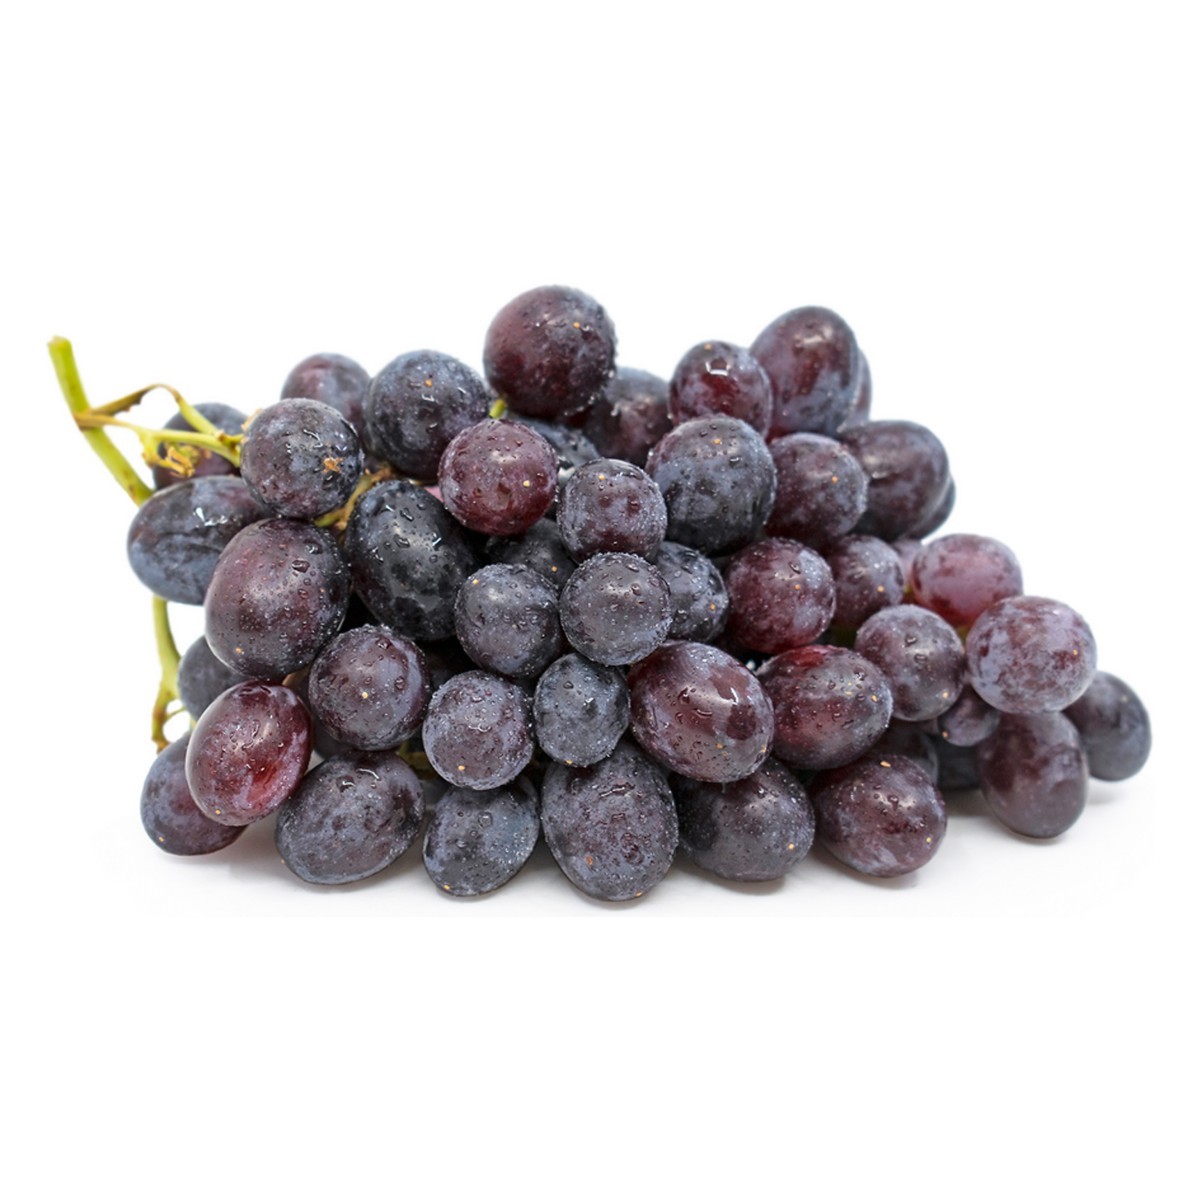 candy-snap-grapes-red-seedless.jpg